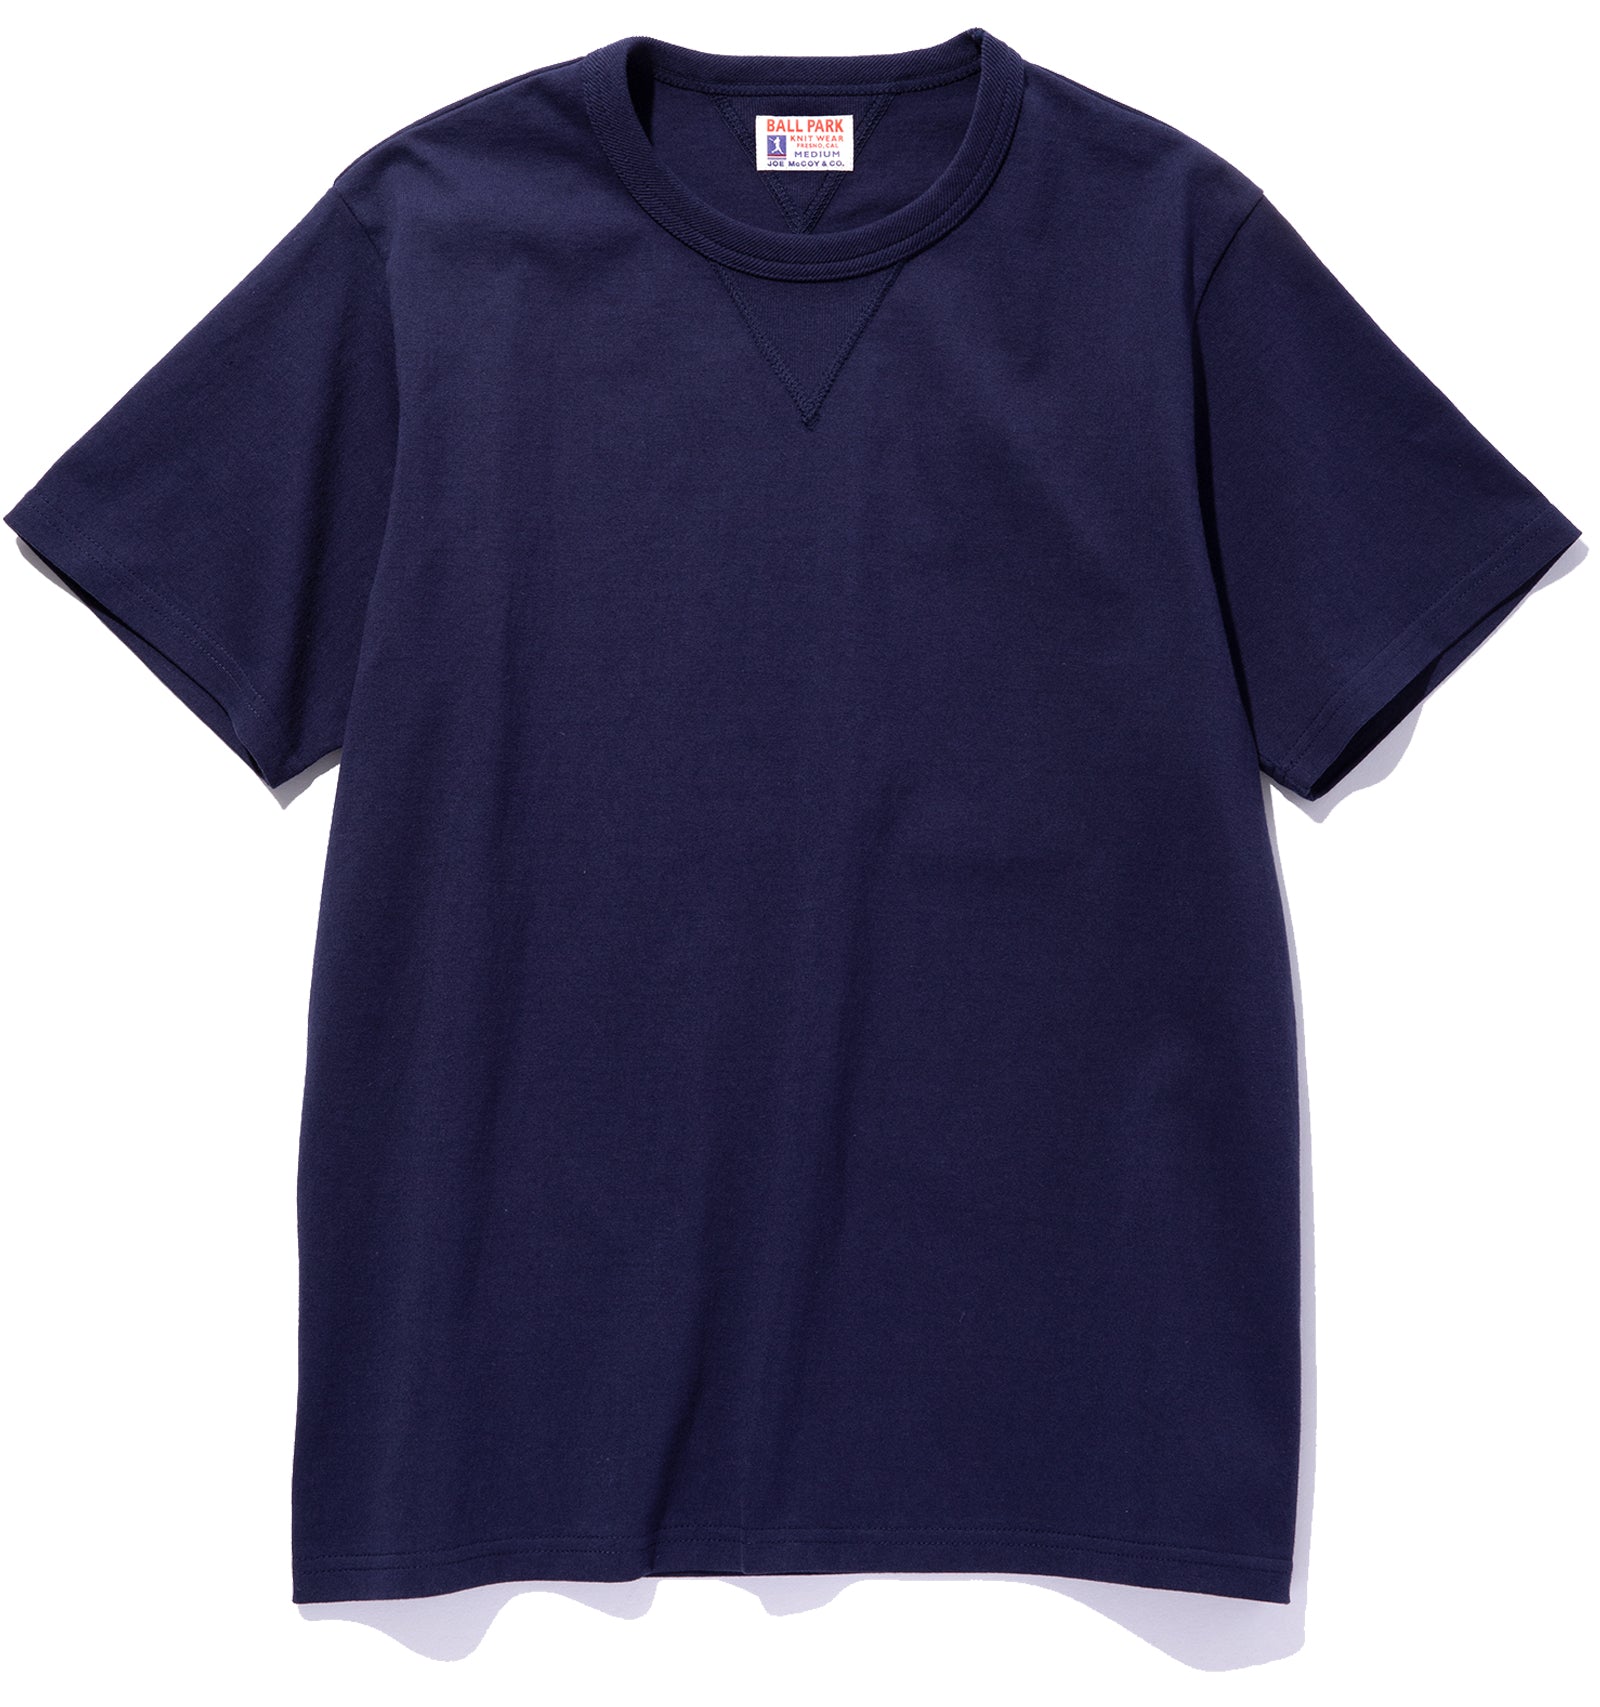 GUSSET T-SHIRT – The Real McCoy's